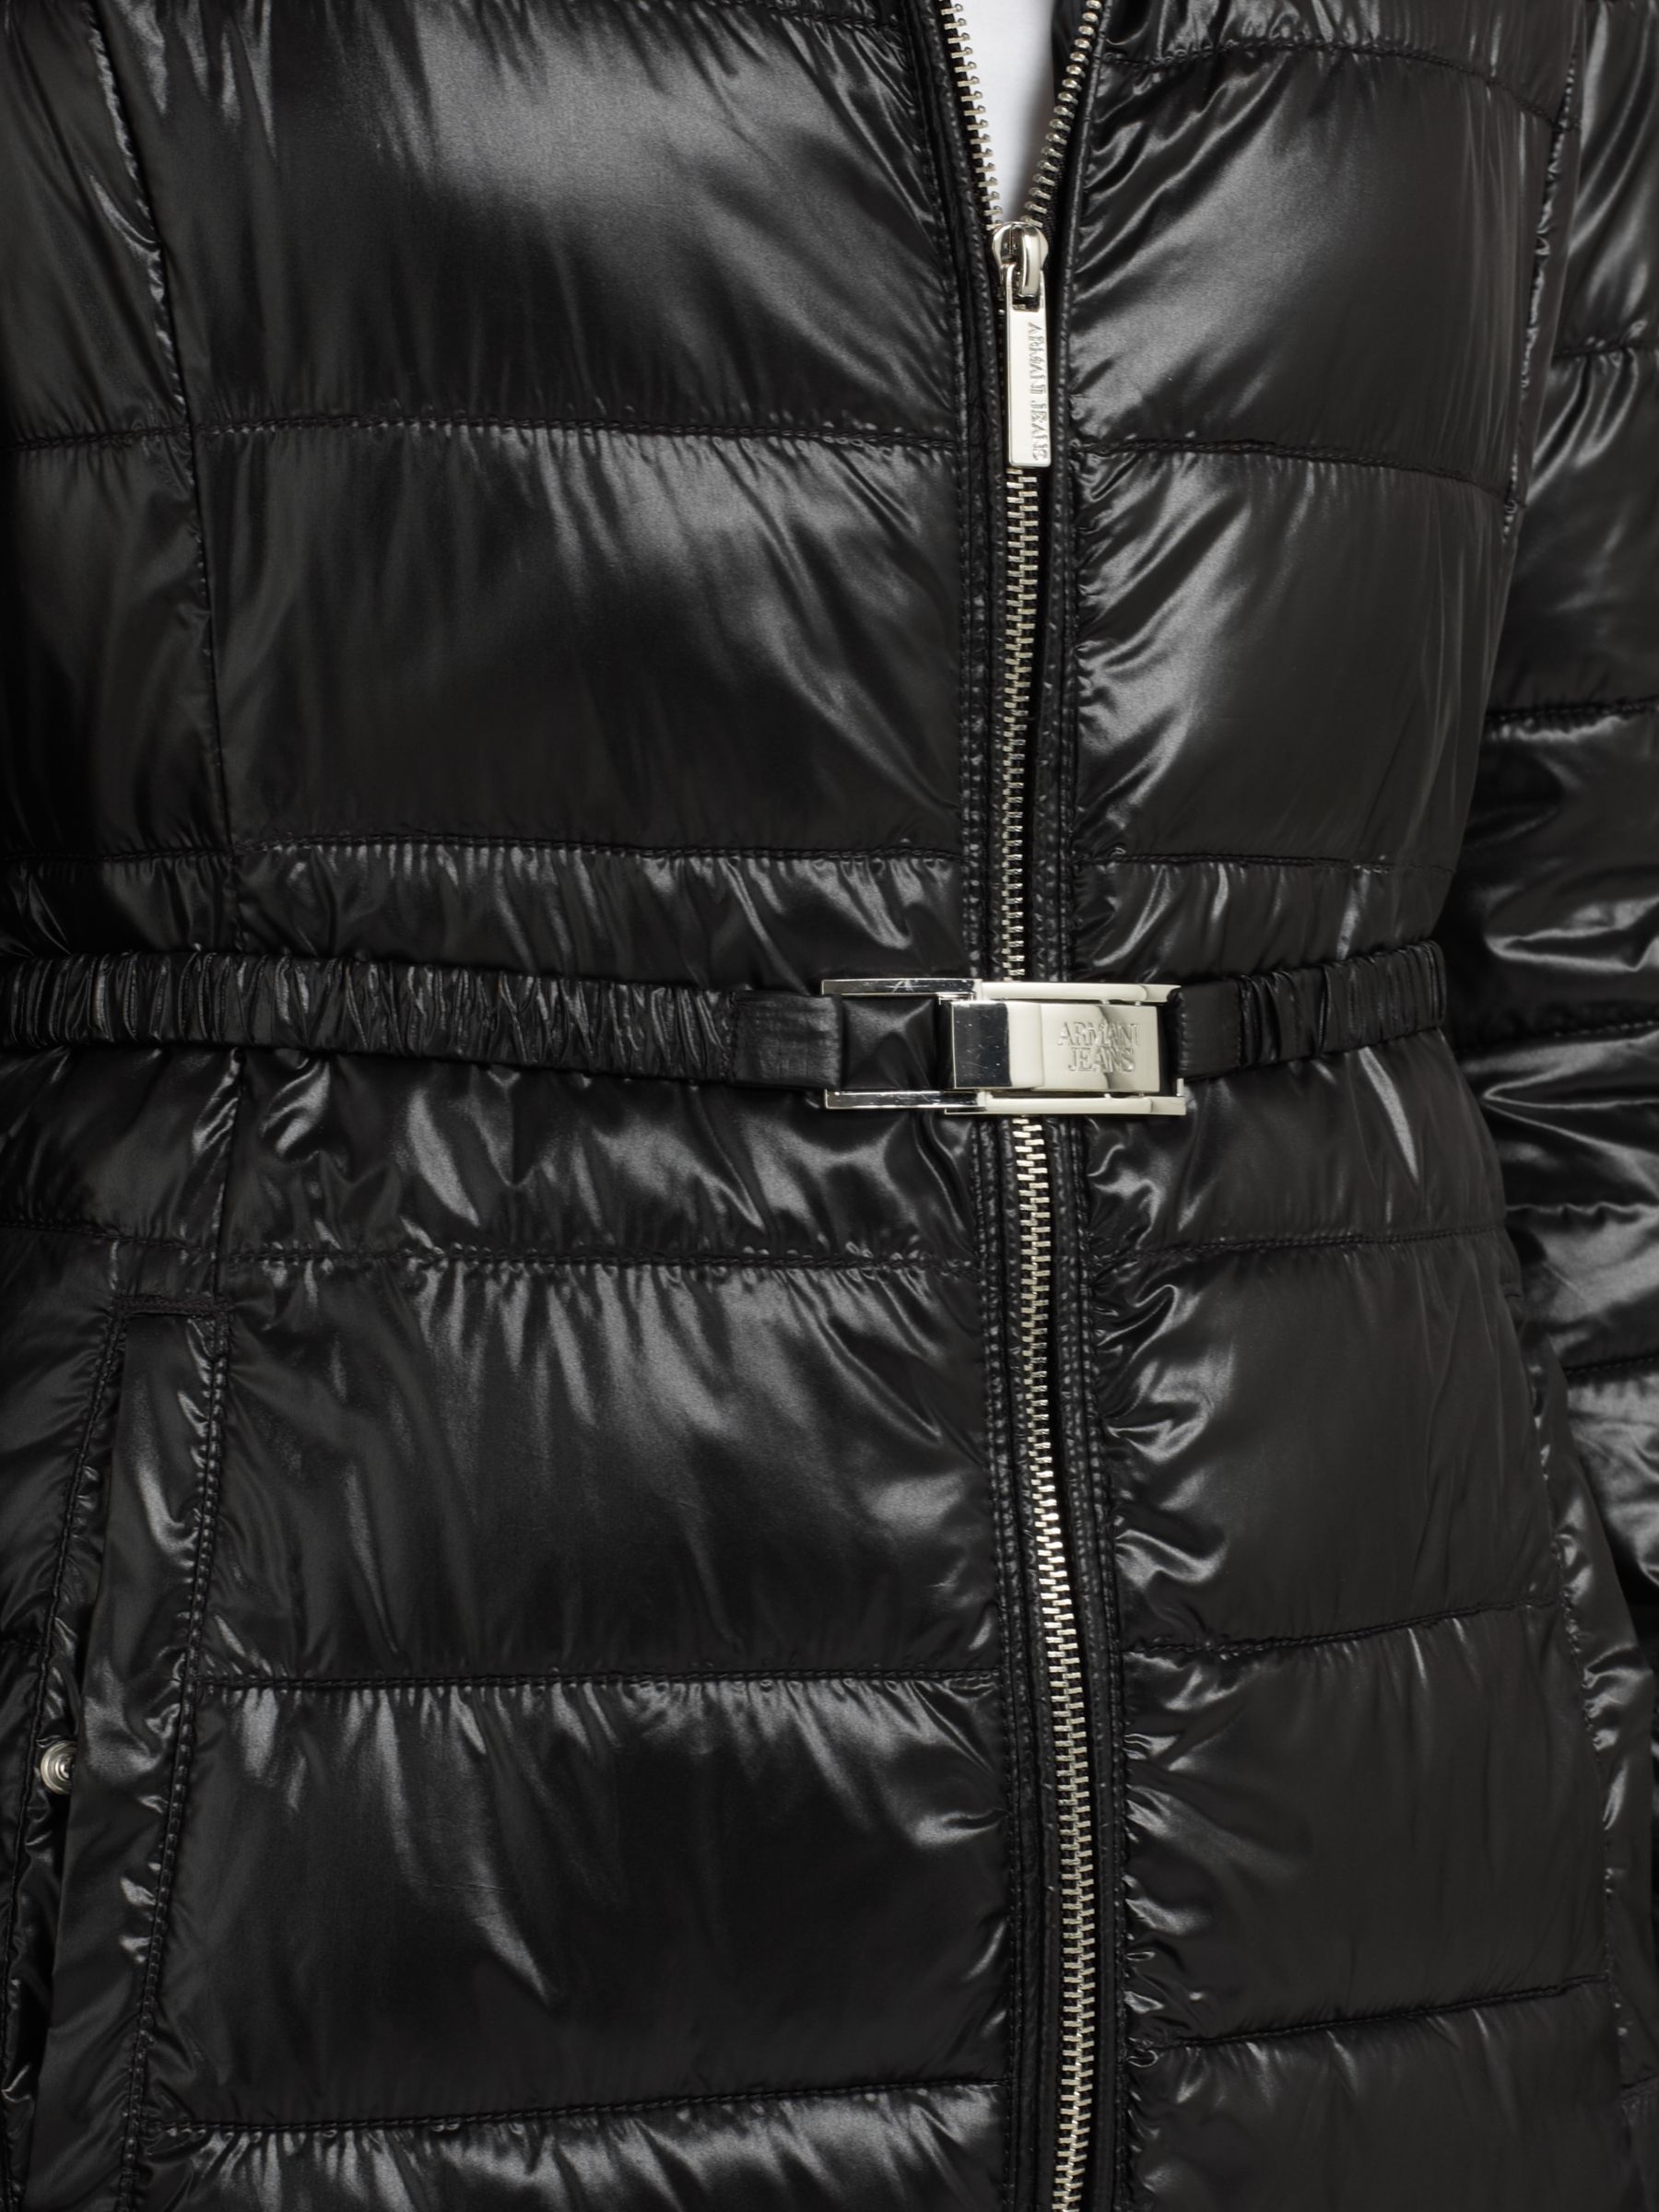 armani jeans quilted jacket